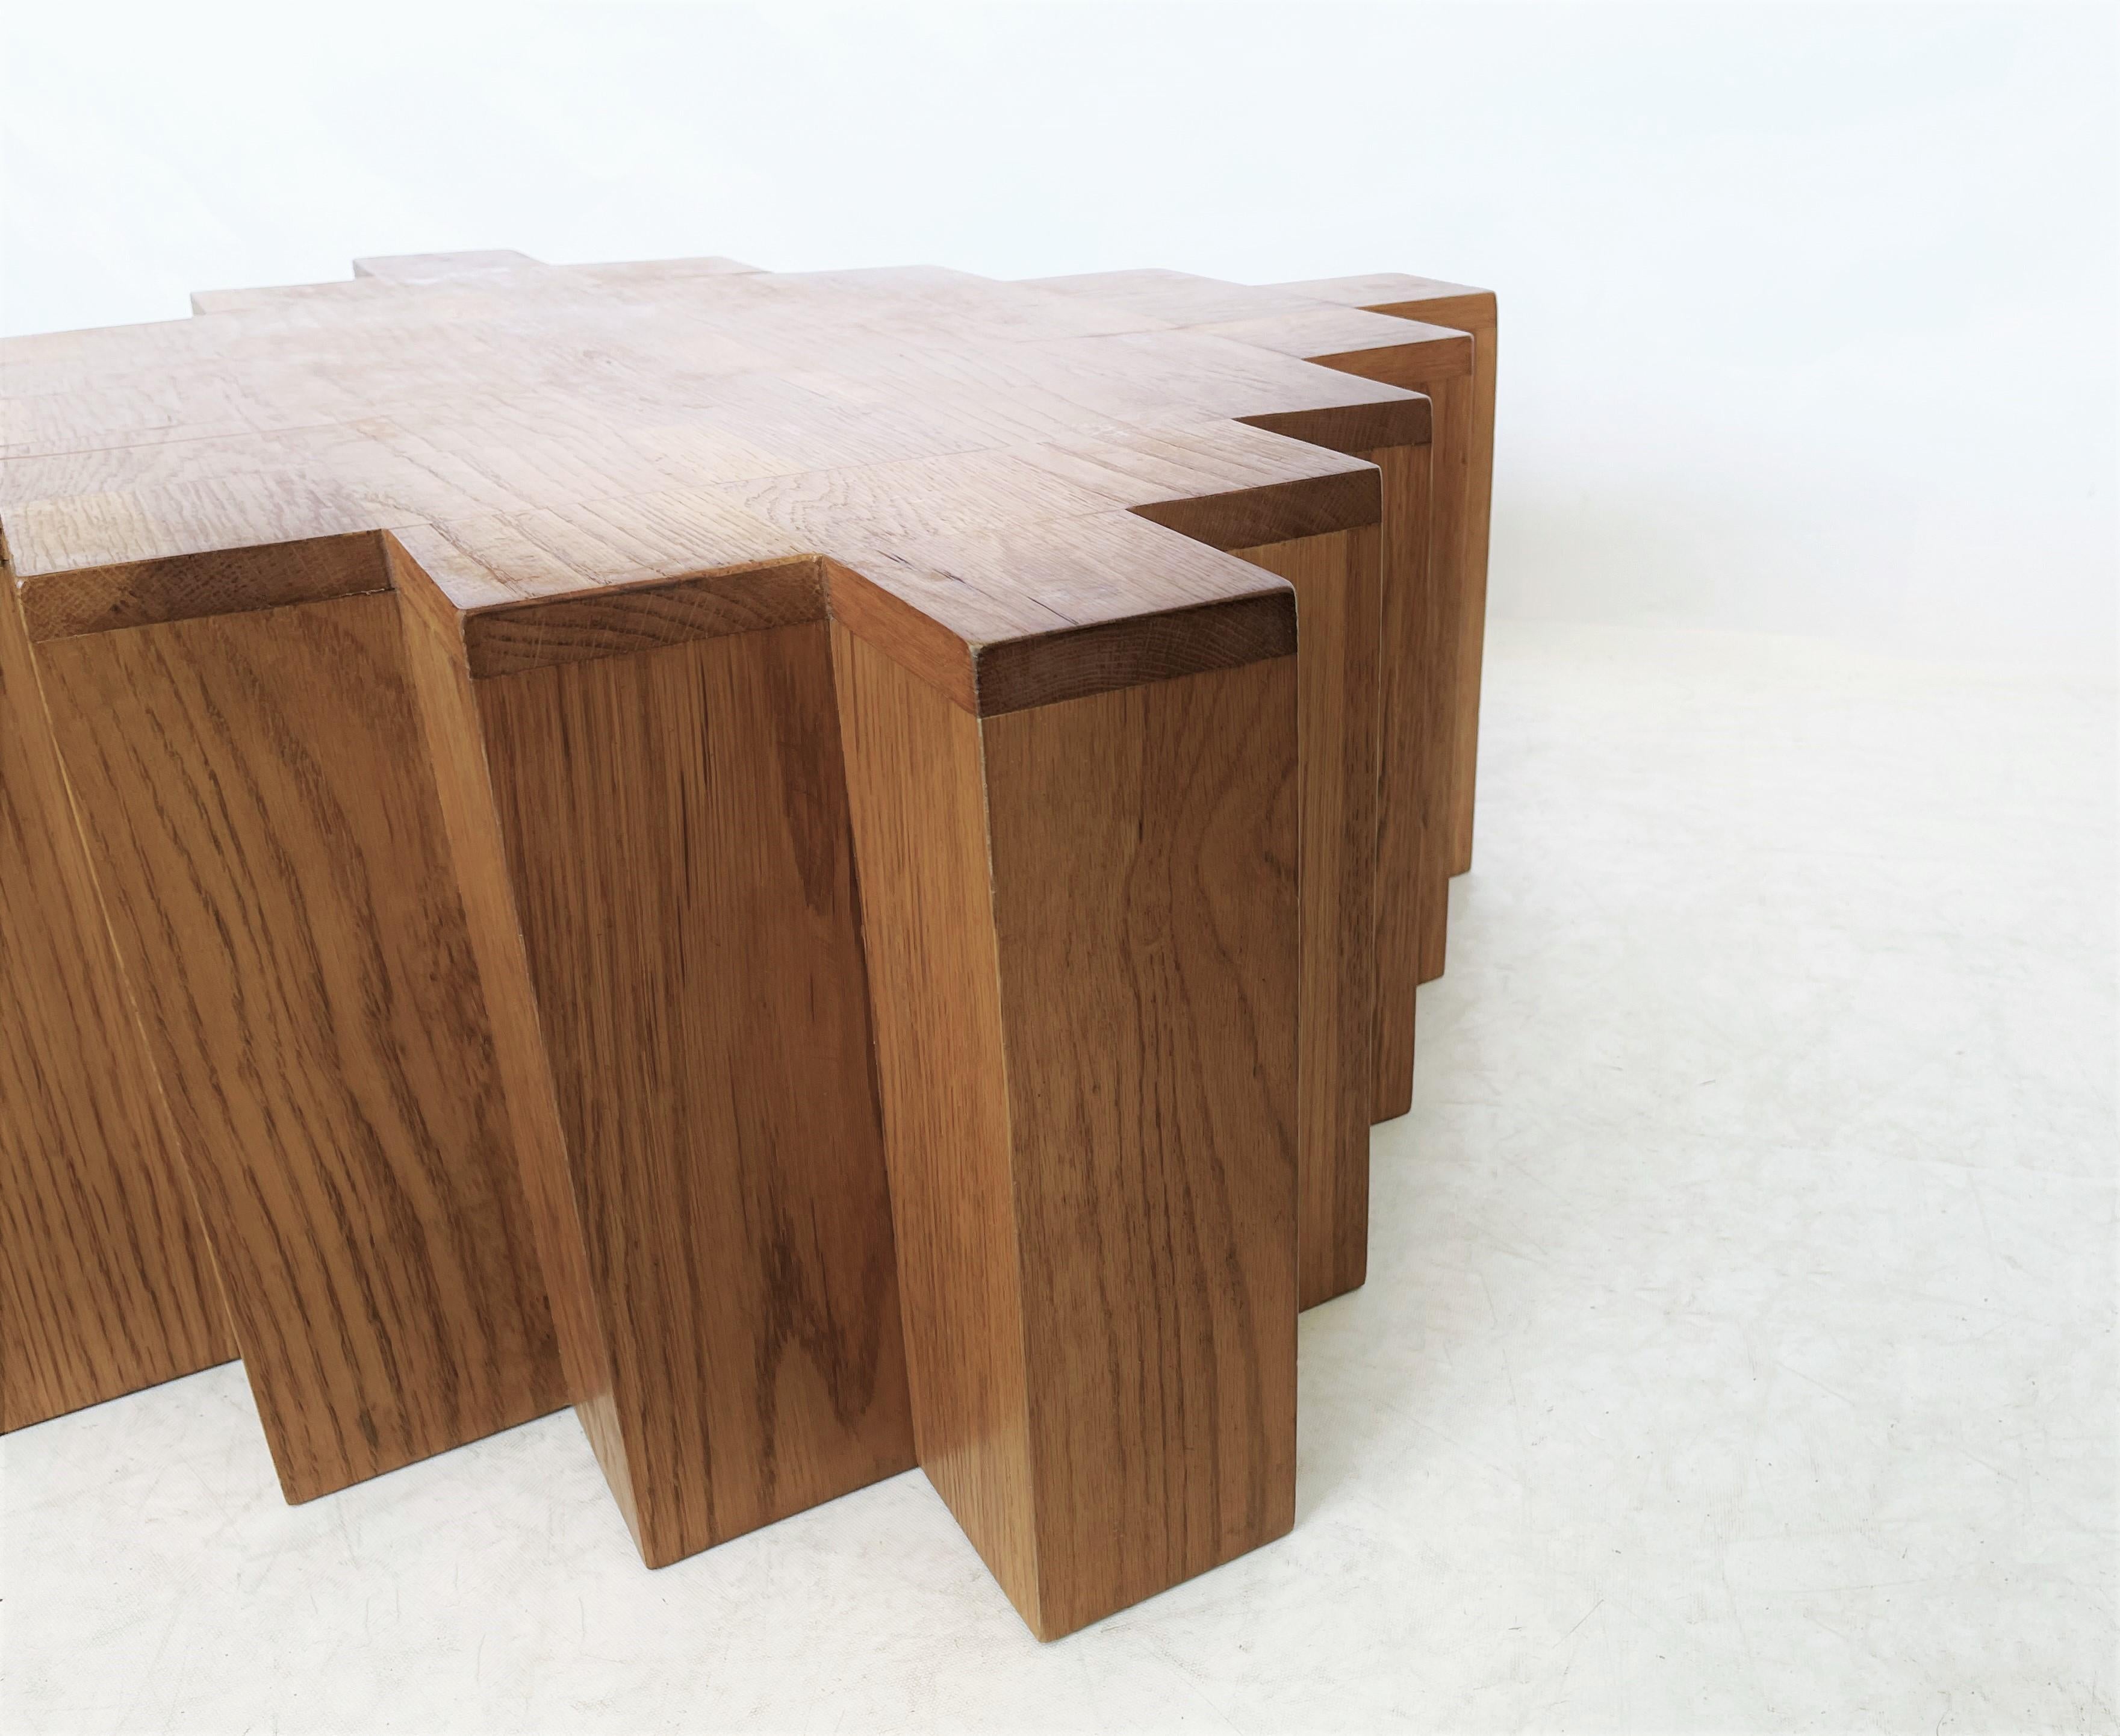 Modern sculptural coffee table. The strong geometric cube shaped with repetitive symmetrical setback corners is accentuated by the distinctive and recurring grain of natural oak wood. Great proportions. Incredible patina. It will natural warmth and